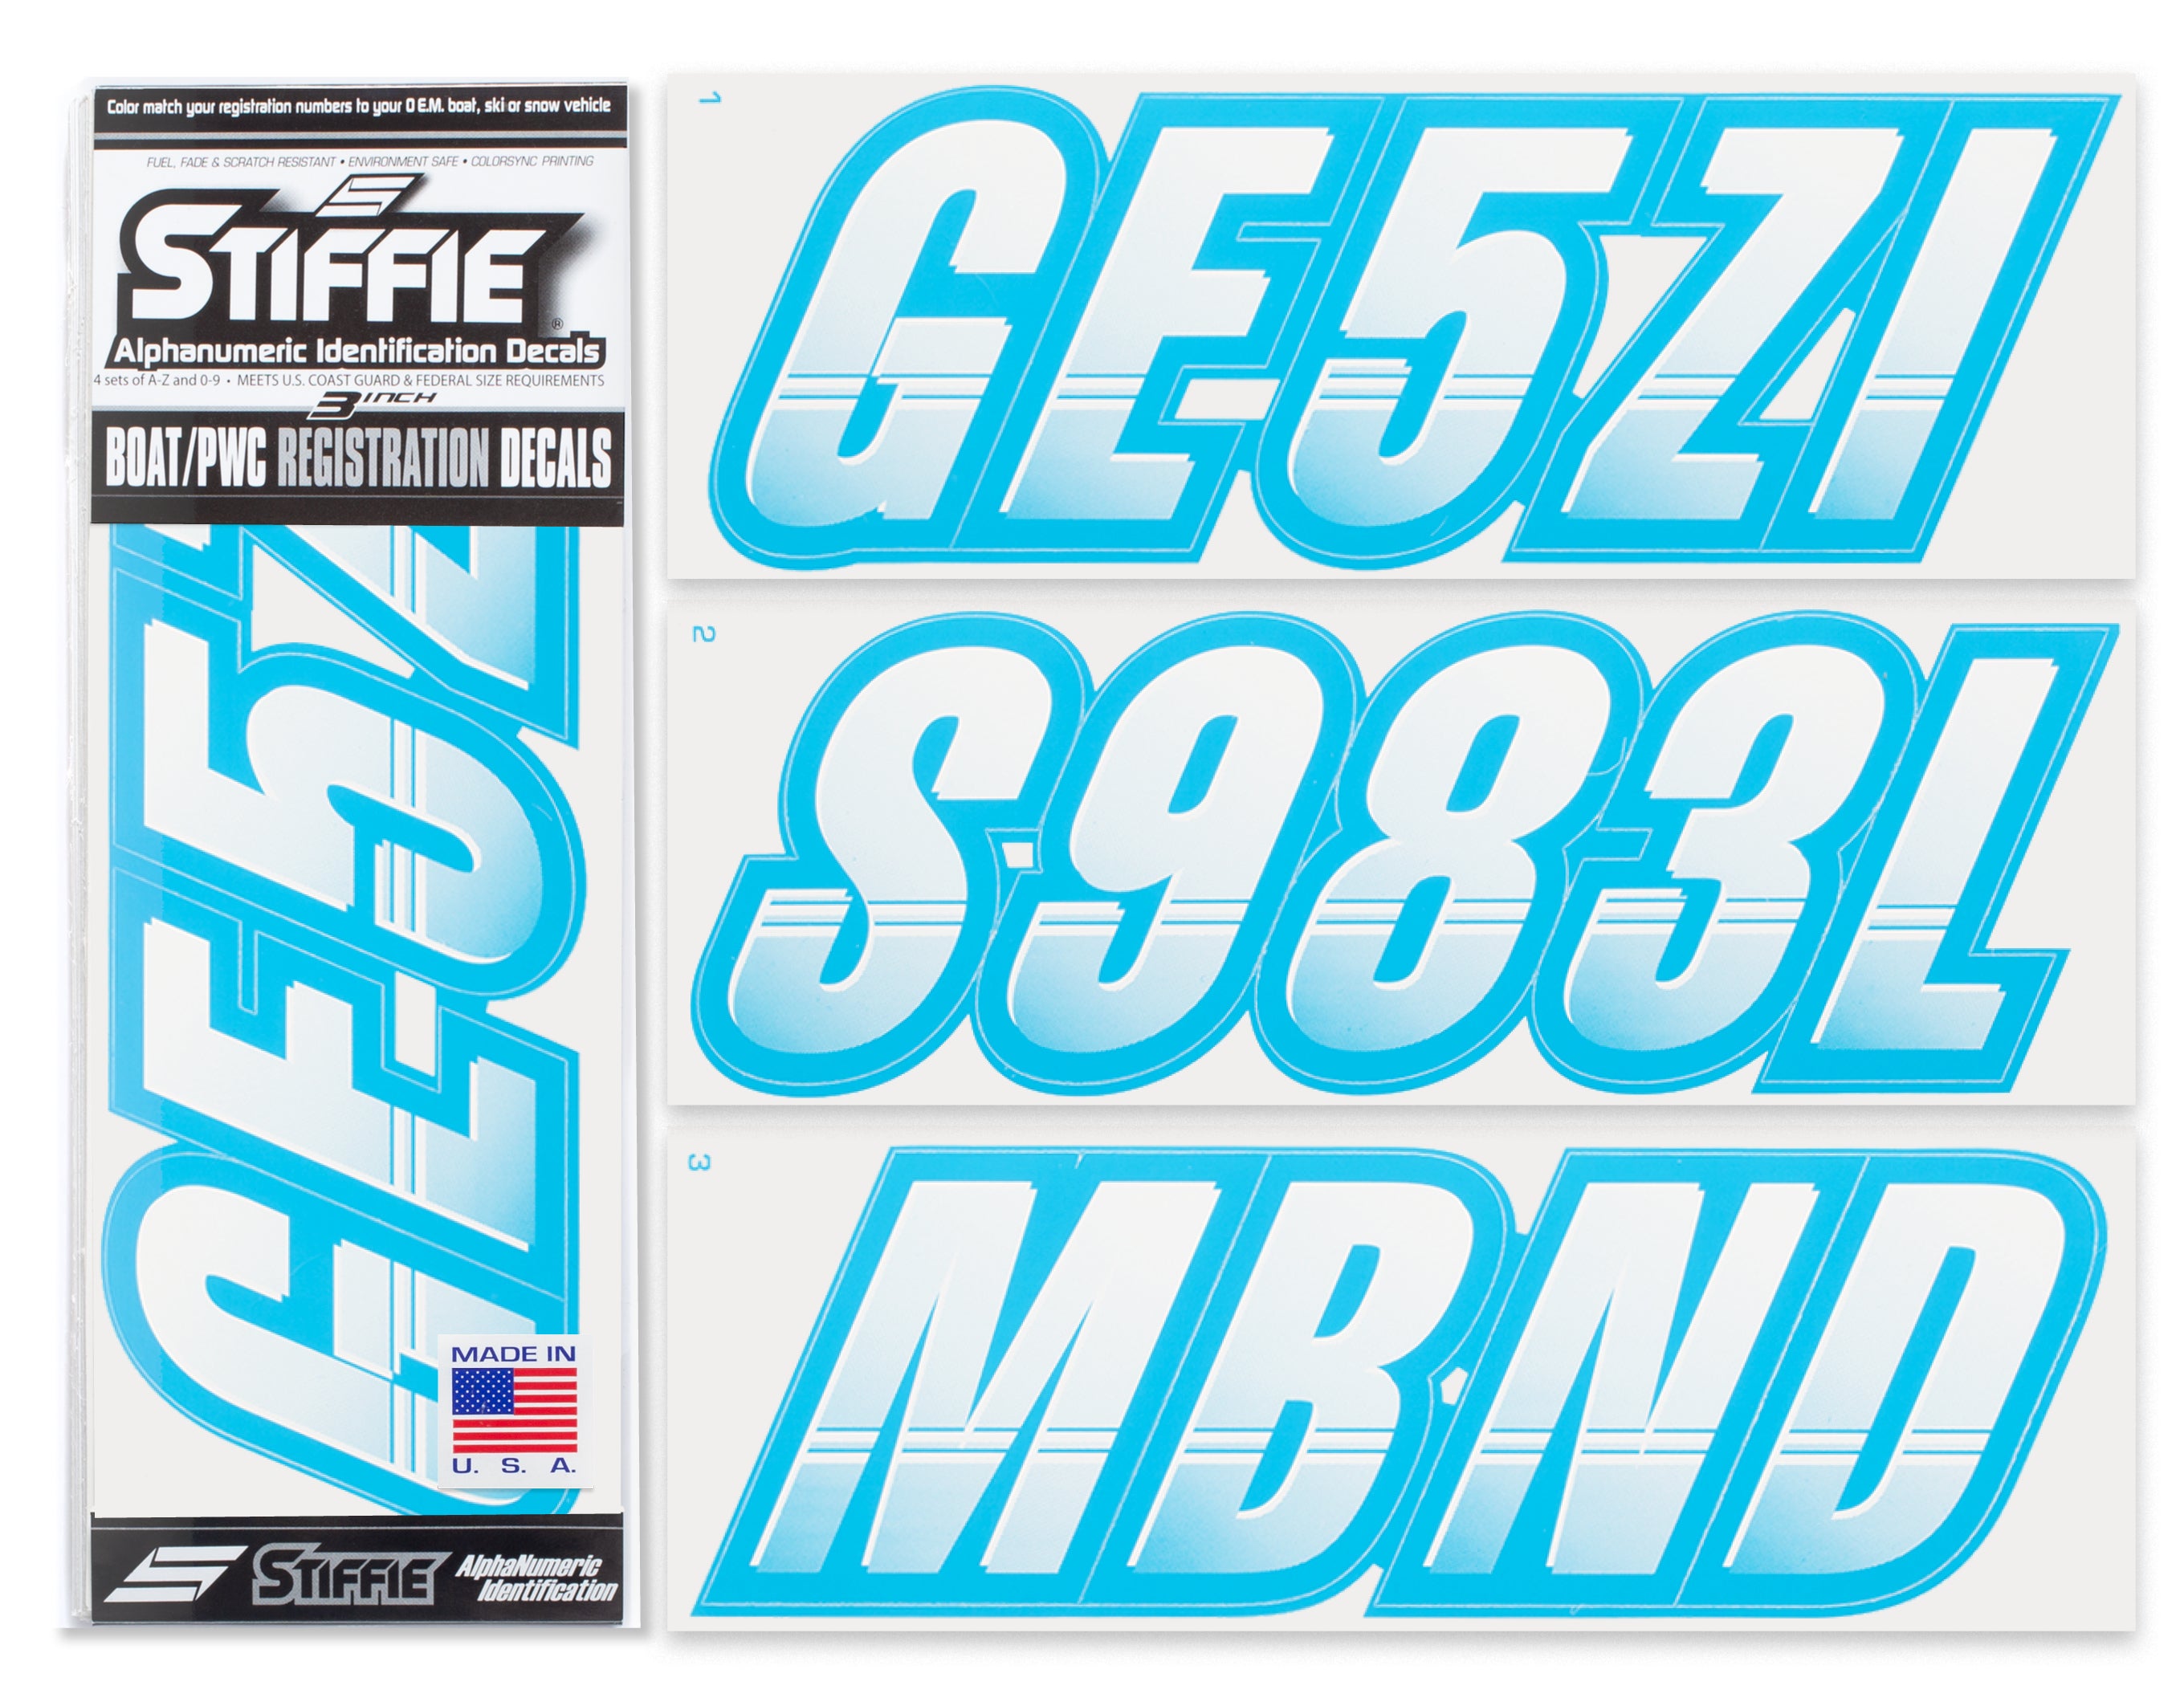 Stiffie Techtron White/Sky Blue 3" Alpha-Numeric Registration Identification Numbers Stickers Decals for Boats & Personal Watercraft